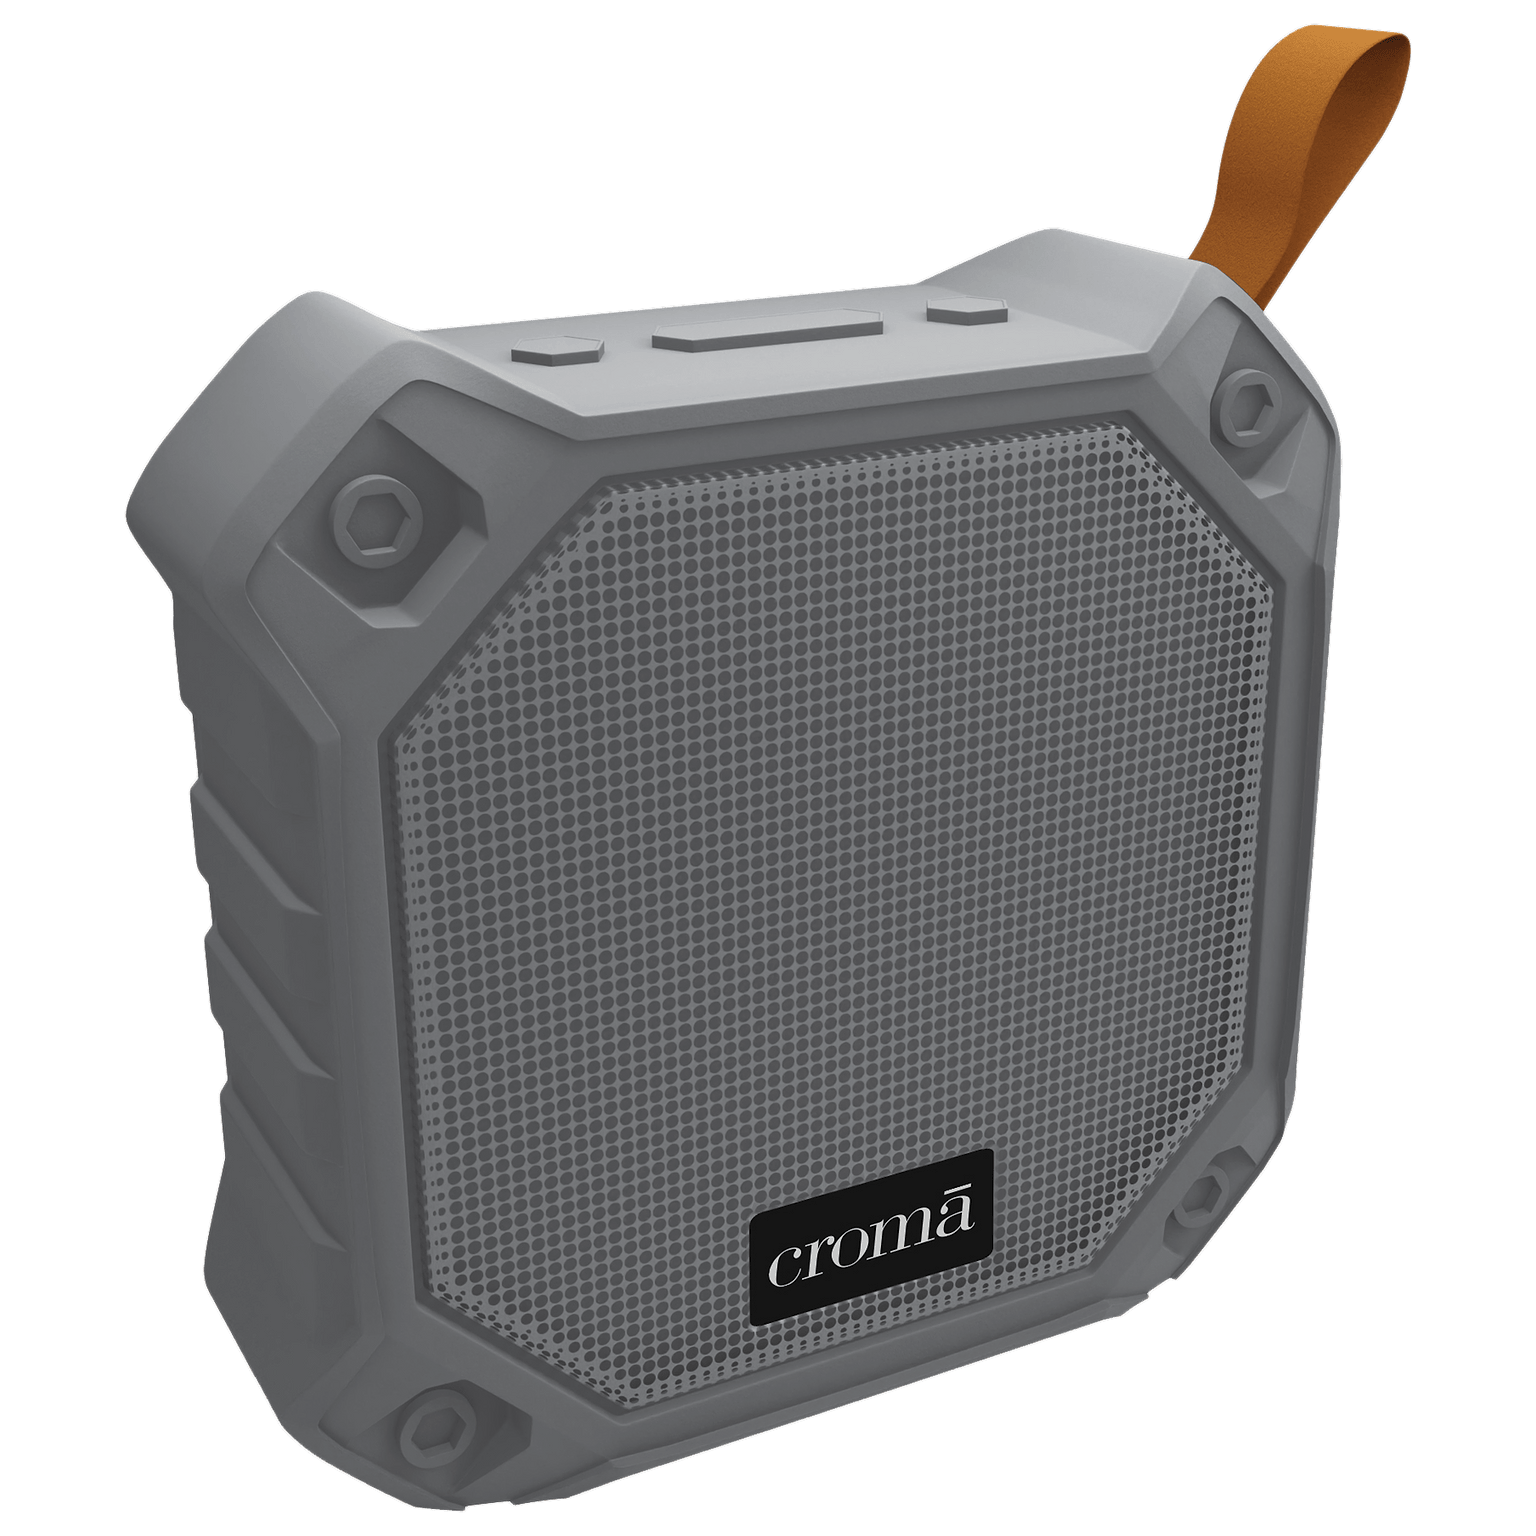 Croma CREMP2101sBTSP 5W Portable Bluetooth Speaker (Water Proof, 21 Hours Playback Time, True Wireless Stereo Function, Grey)